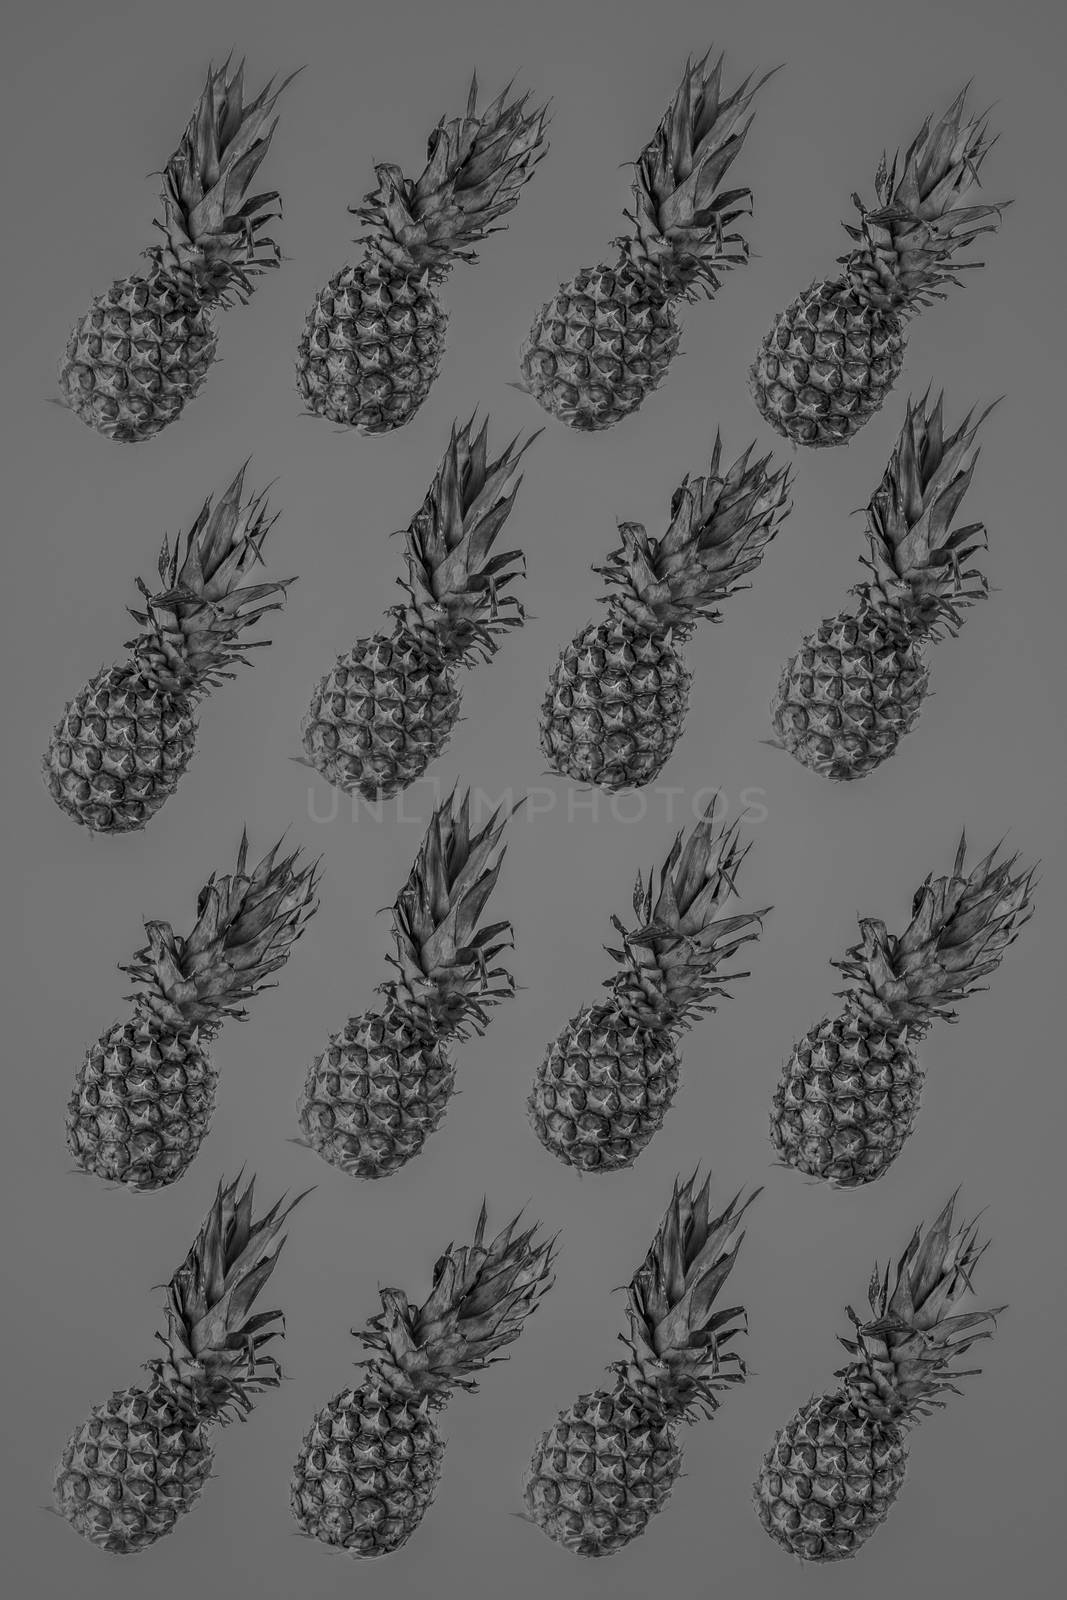 Isolated pineapples pattern on bright vivid turquoise background by photoboyko